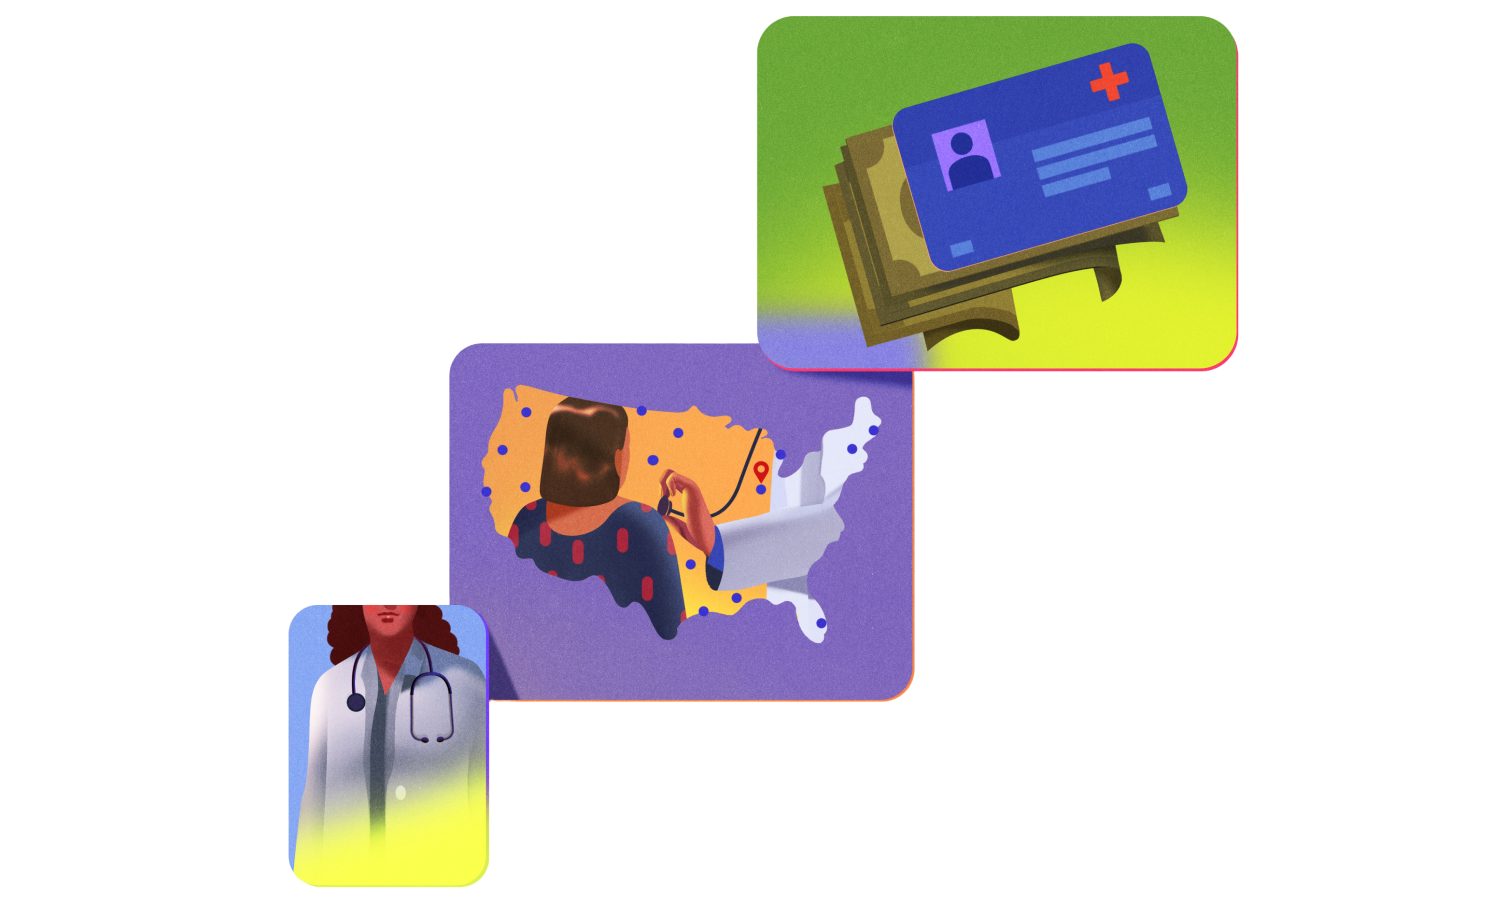 conceptual illustraiton. 3 tiles: 1) doctor 2) map of the US 3) stack of money and a health insurance card